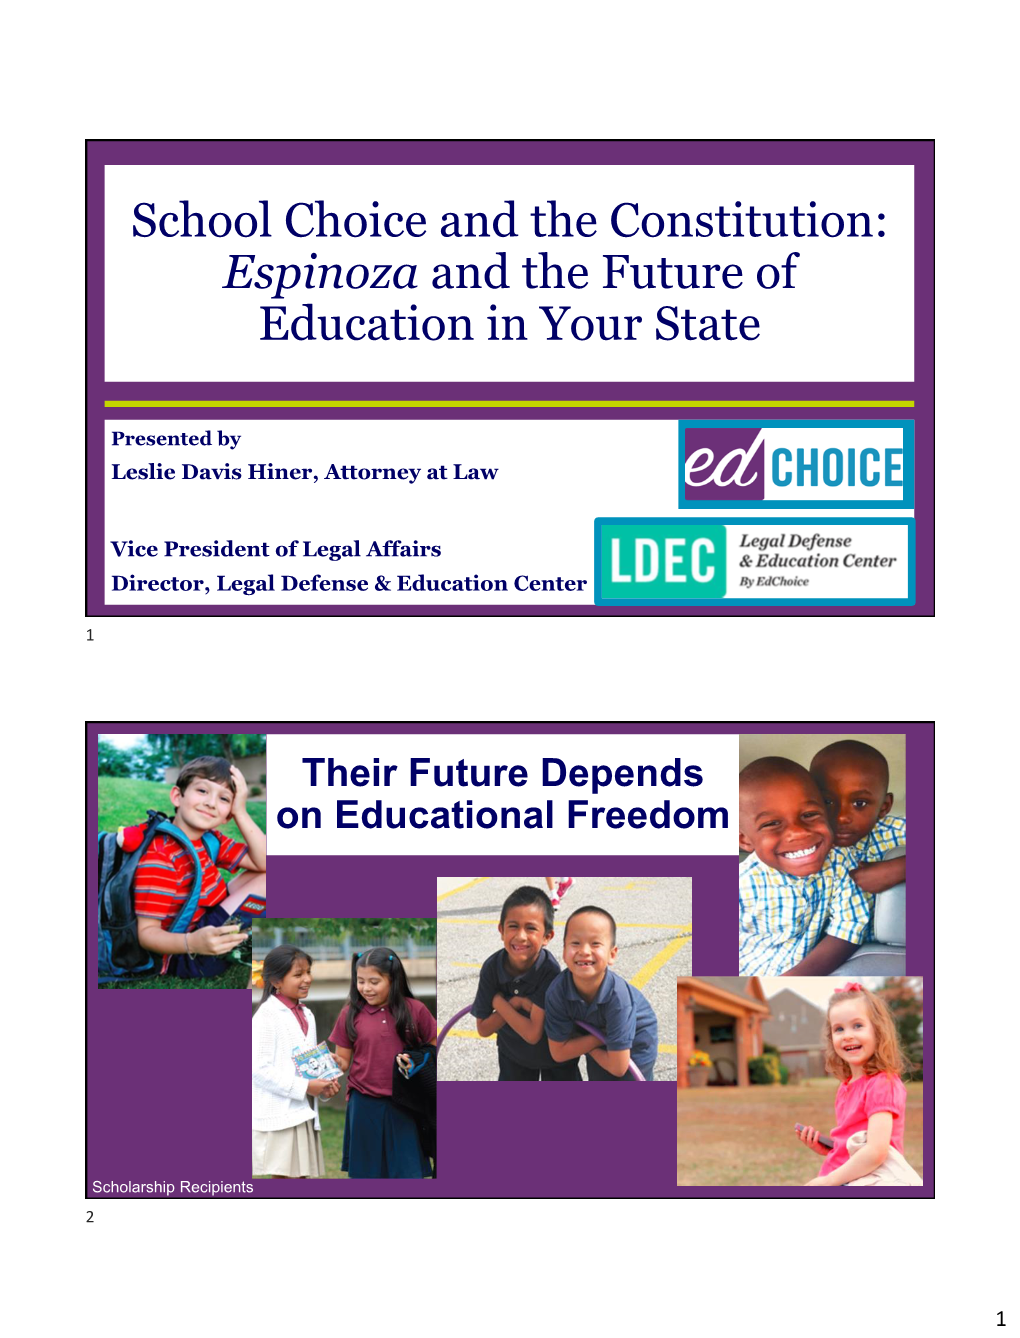 School Choice and the Constitution: Evaluating the Constitutionality of Educational Choice